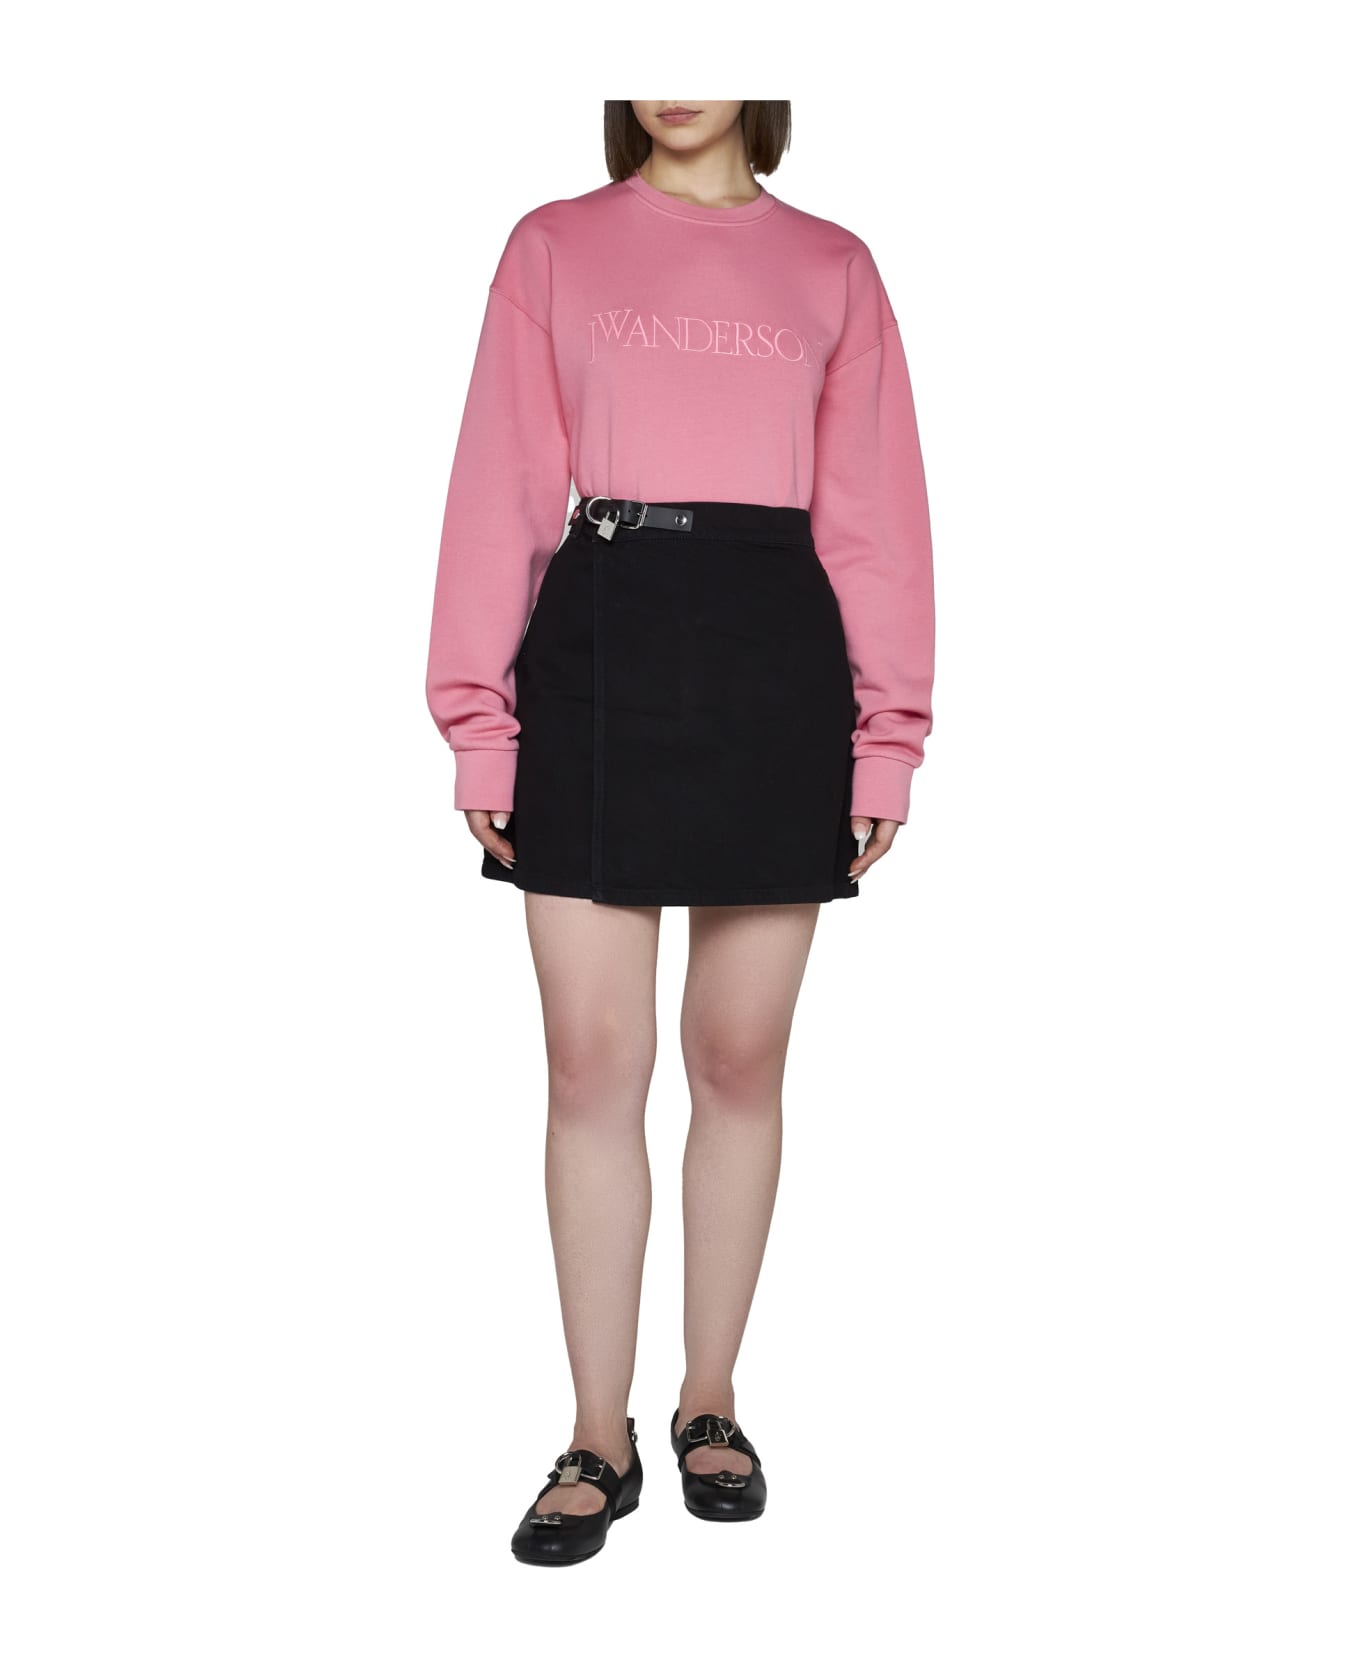 J.W. Anderson Sweater - Pink